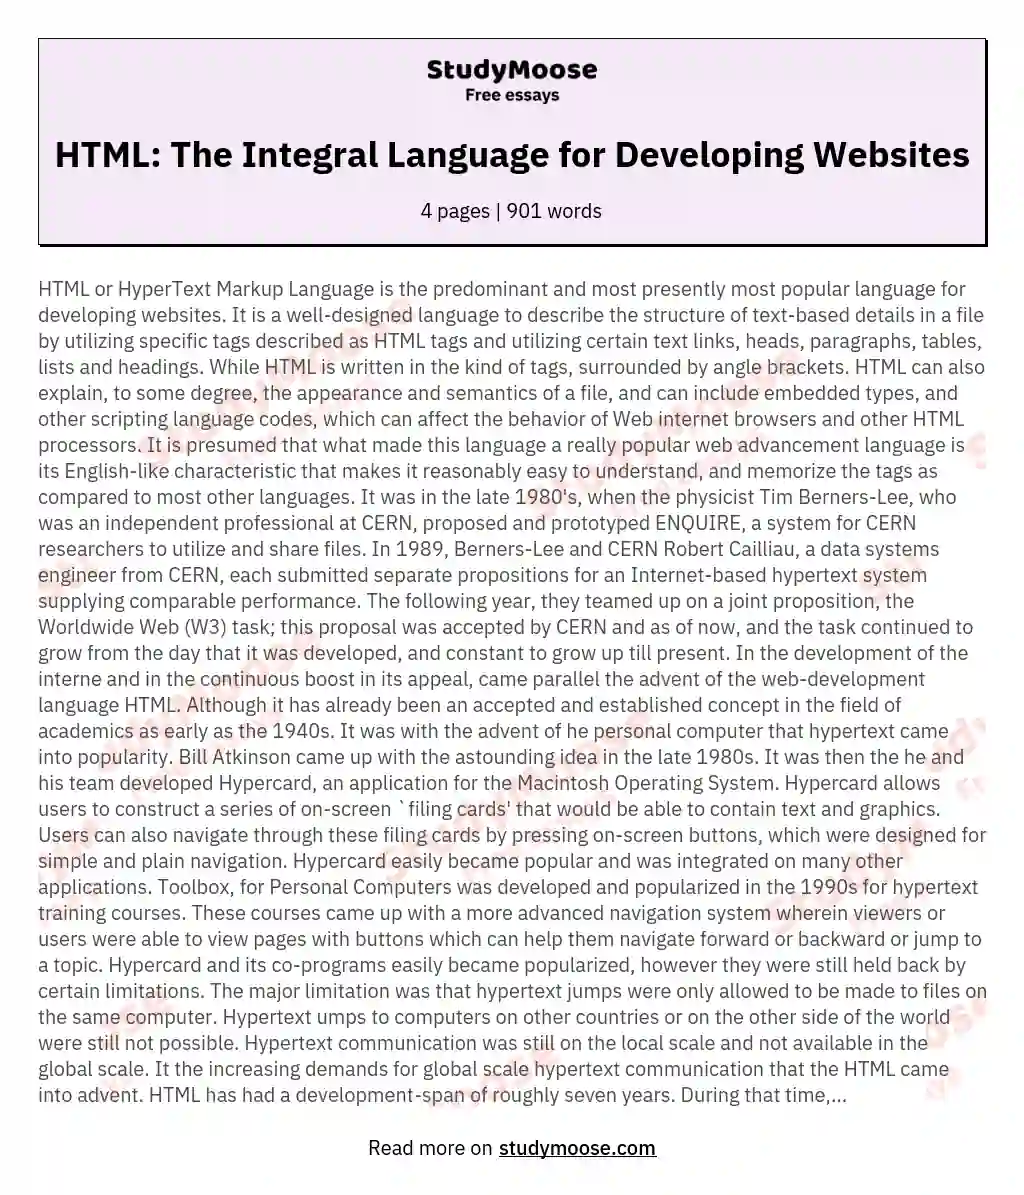 HTML: The Integral Language for Developing Websites